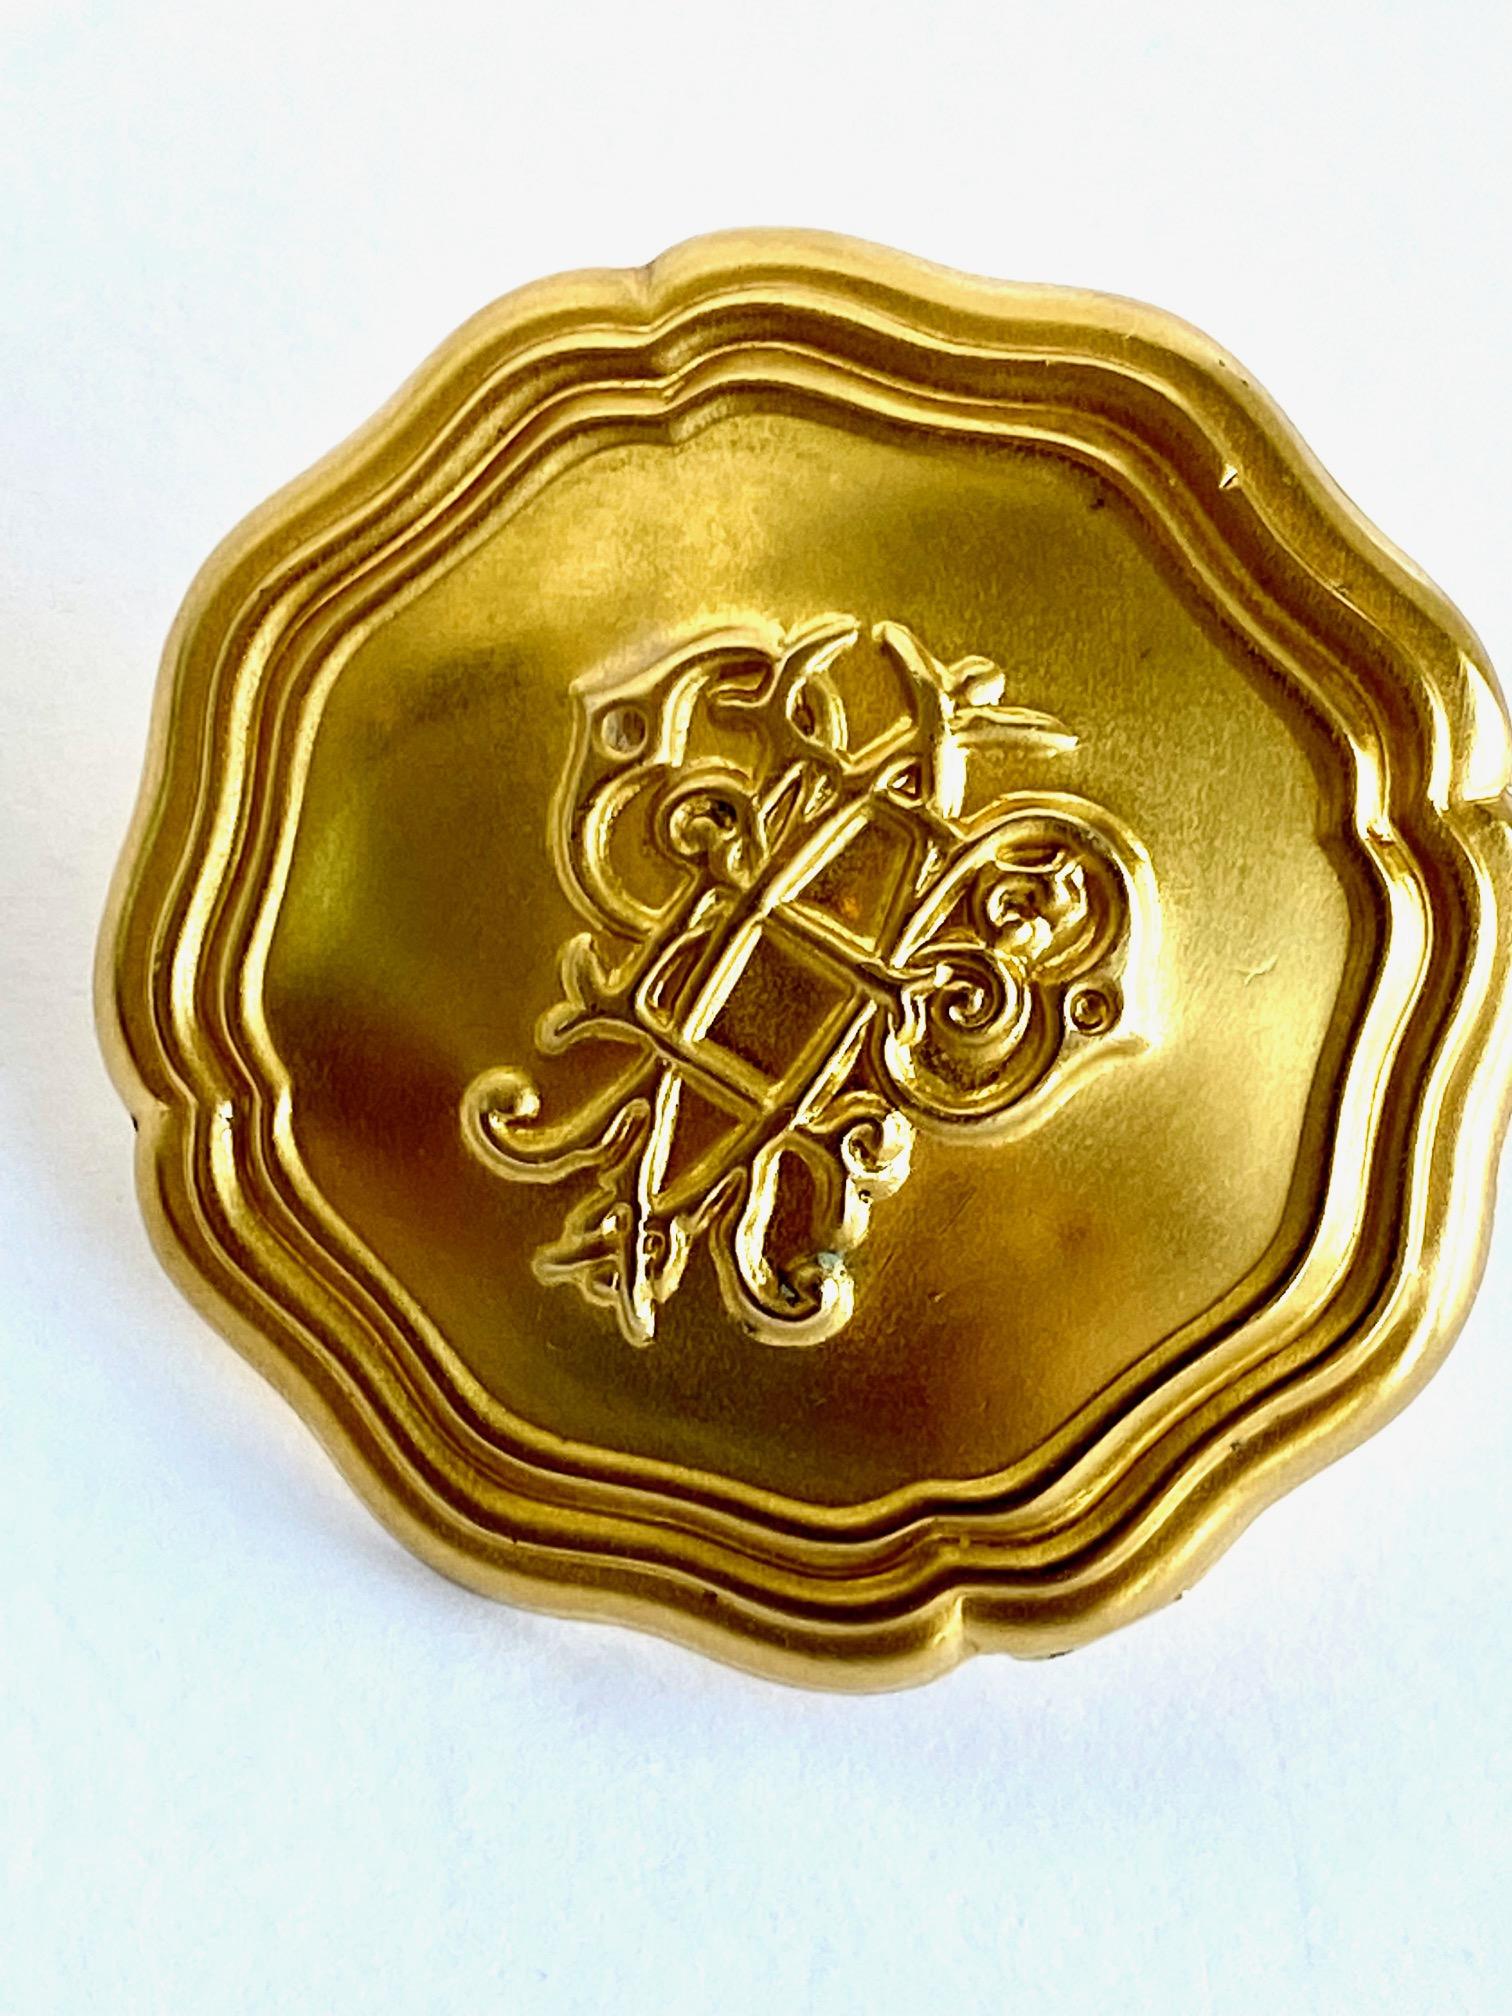 A large monogramed medallion top 1980s ring in satin and shiny gold by iconic fashion house Emilio Pucci. The large top medallion is satin gold, measures 1.75 inches in diameter and set onto a shiny gold tone open band. The medallion has a light